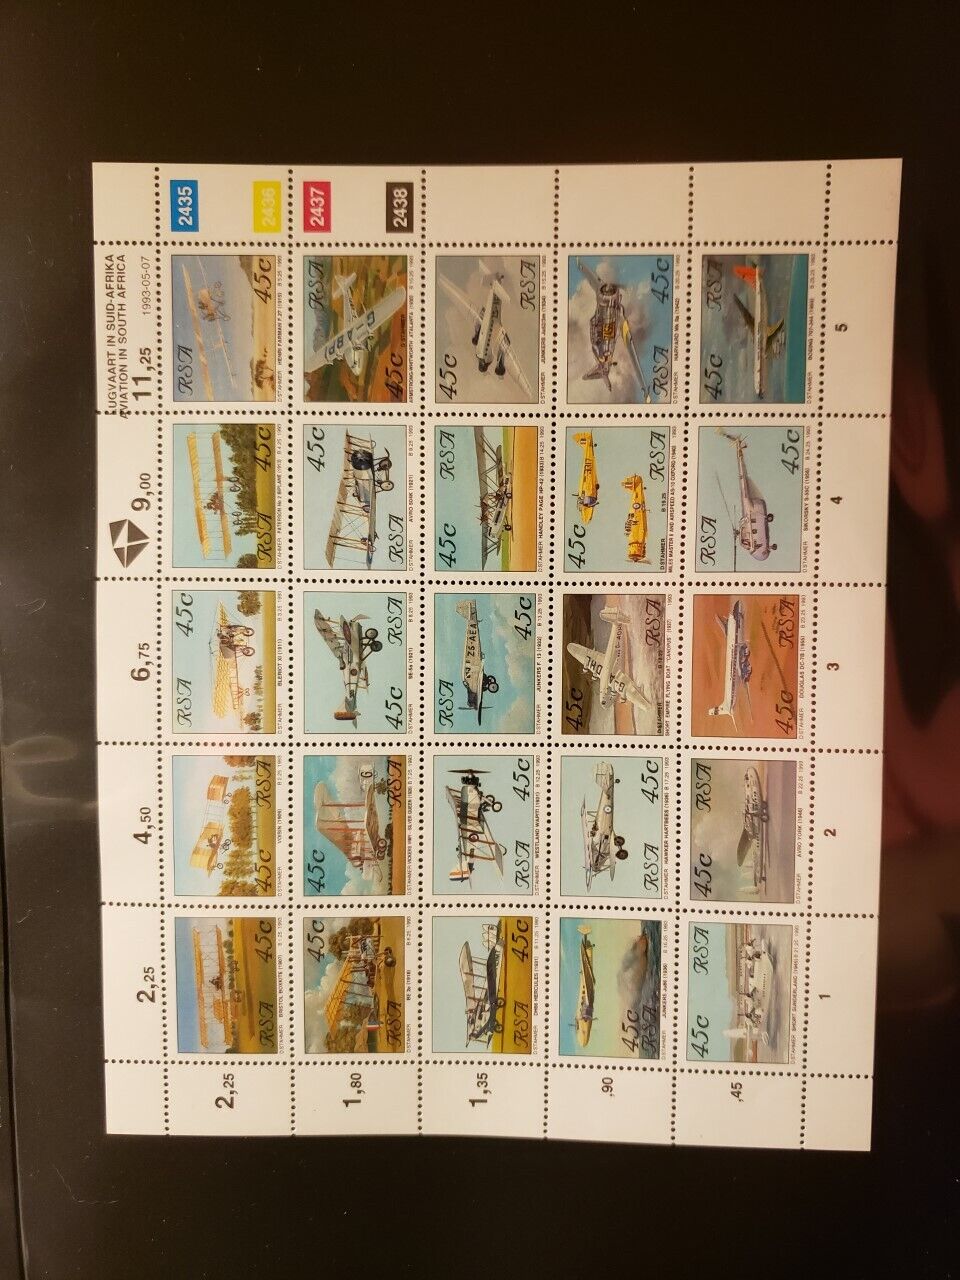 South Africa Aircraft & Aviation Stamps Lot of 4 - MNH - See Details for List Без бренда - фотография #2